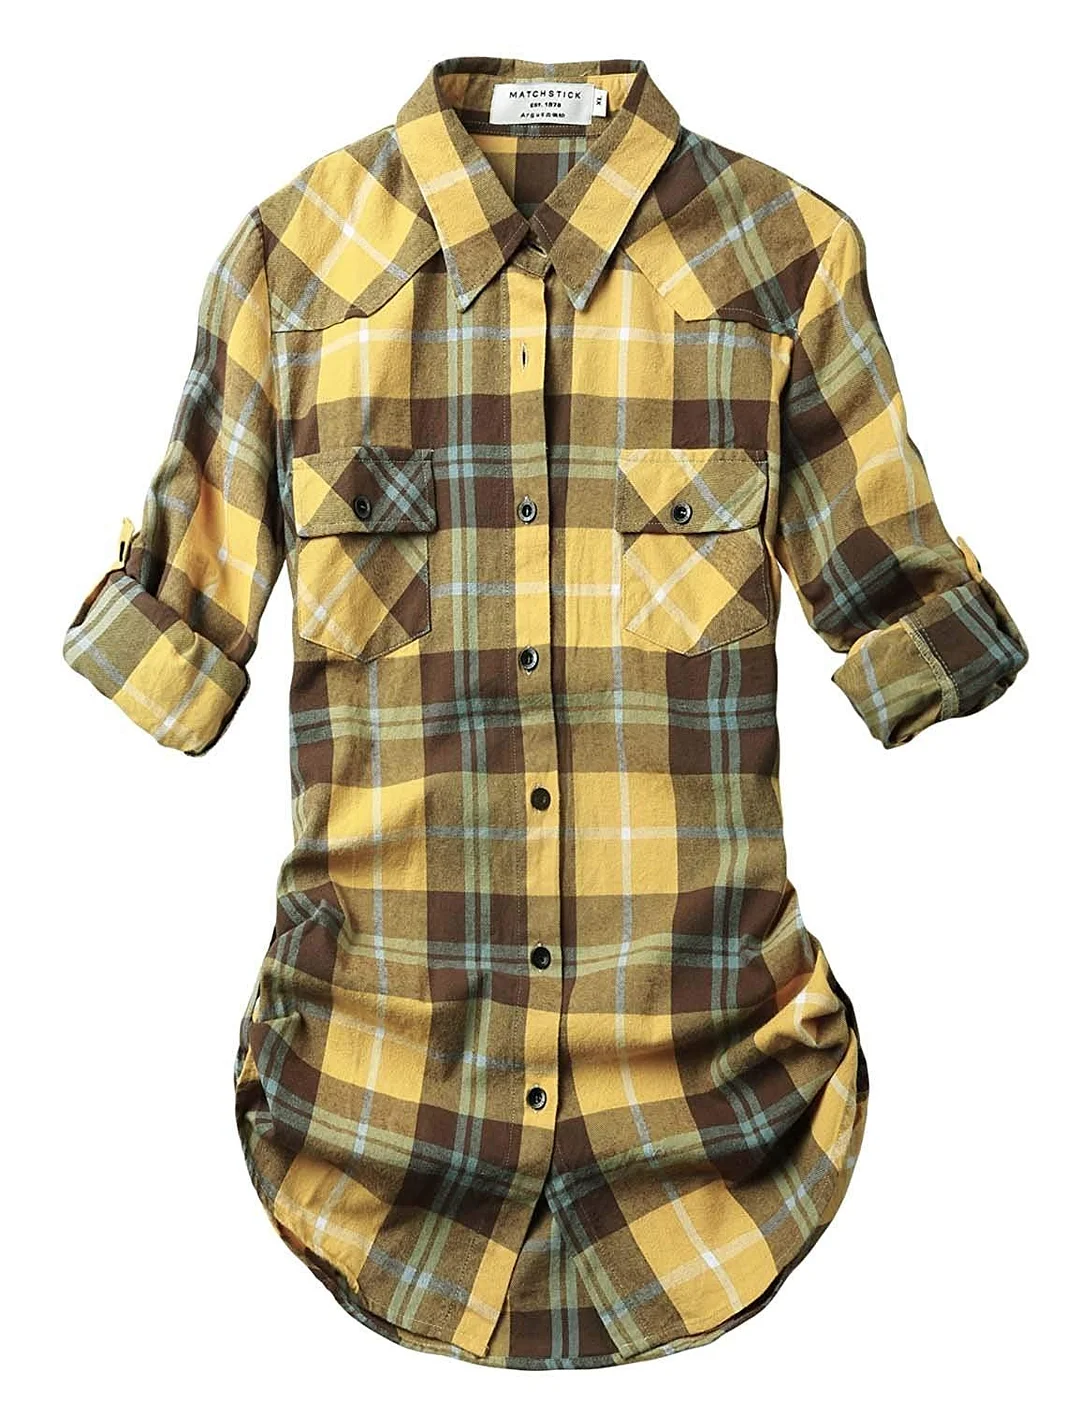 Women's Long Sleeve Flannel Plaid Shirt Slim fit, button up long sleeves